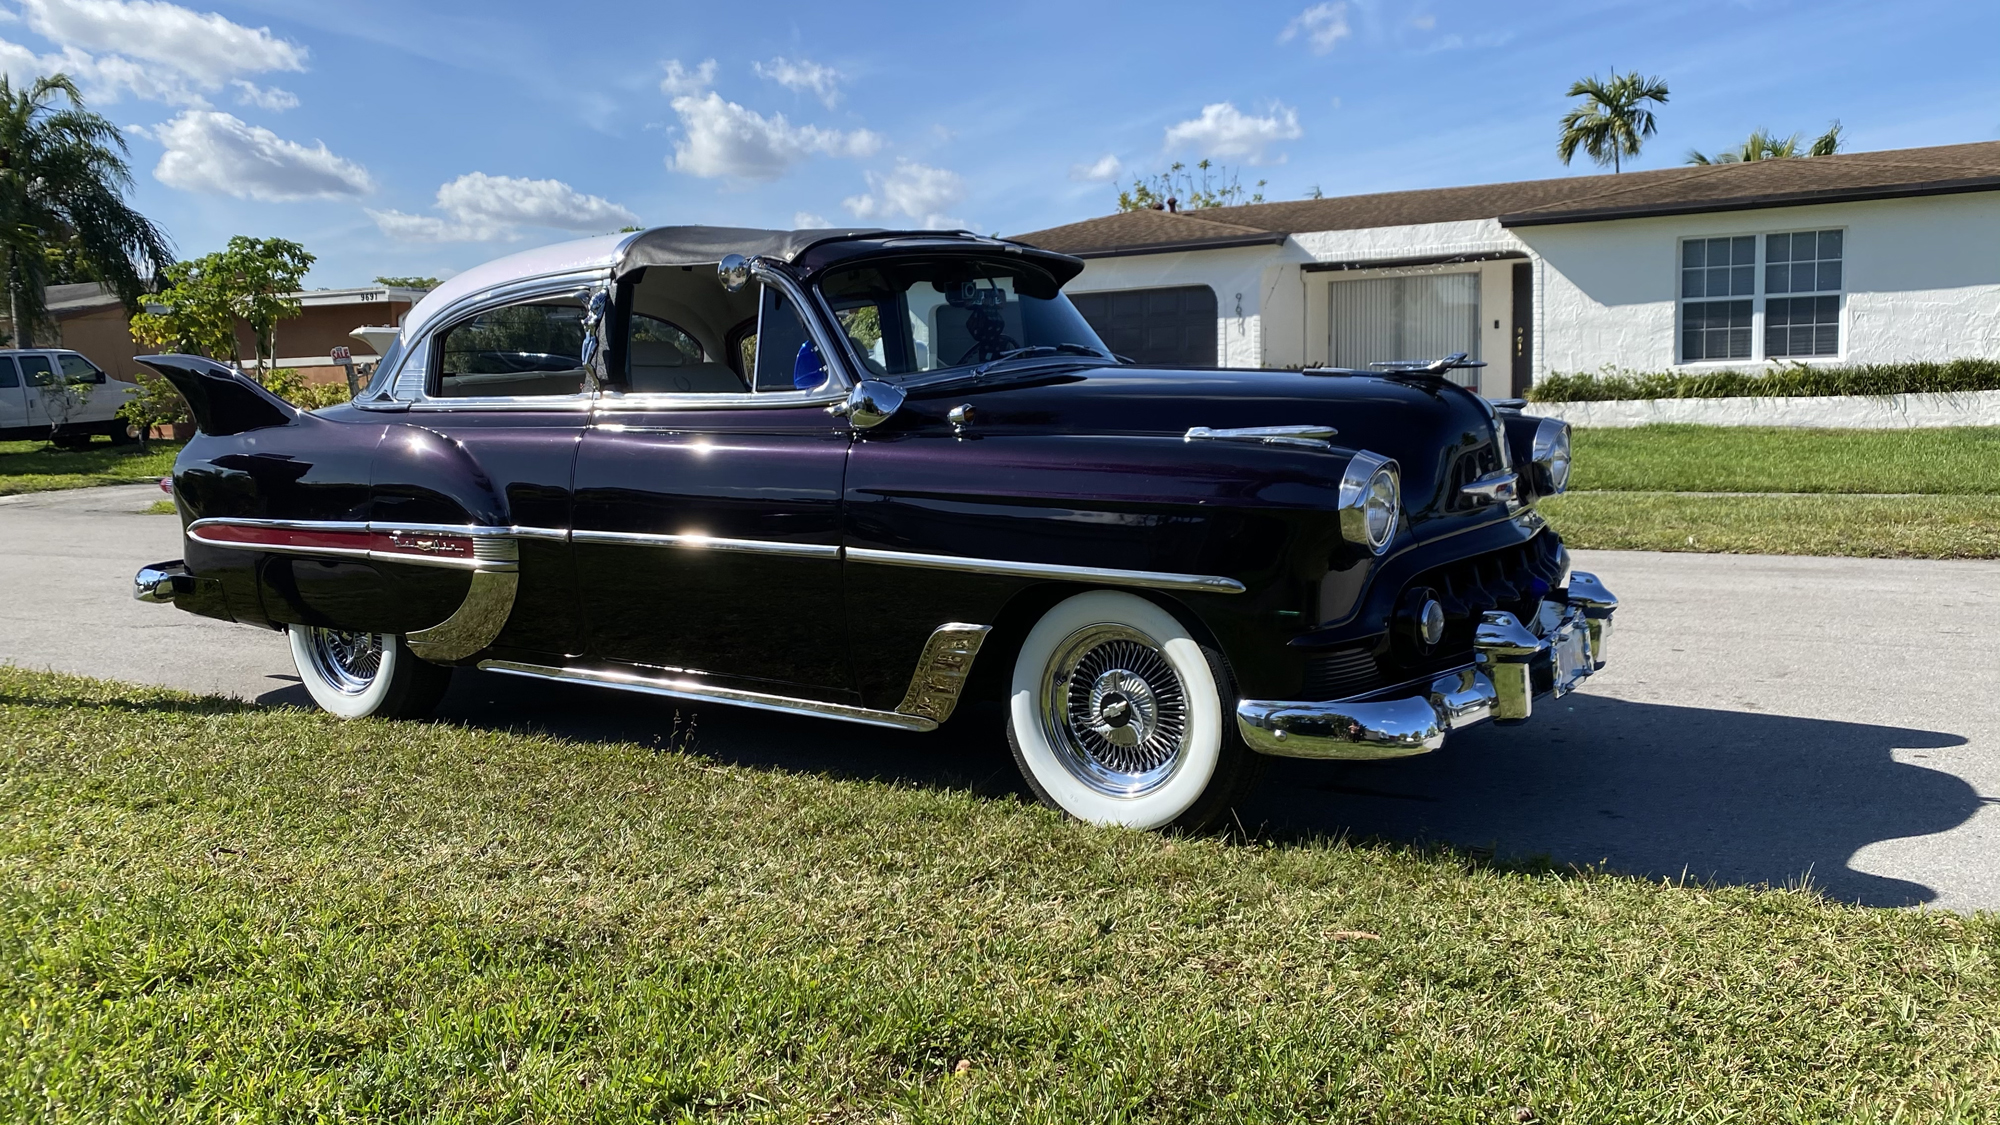 53 Chevy Custom Belair in the Sun, March 2021, front passenger side